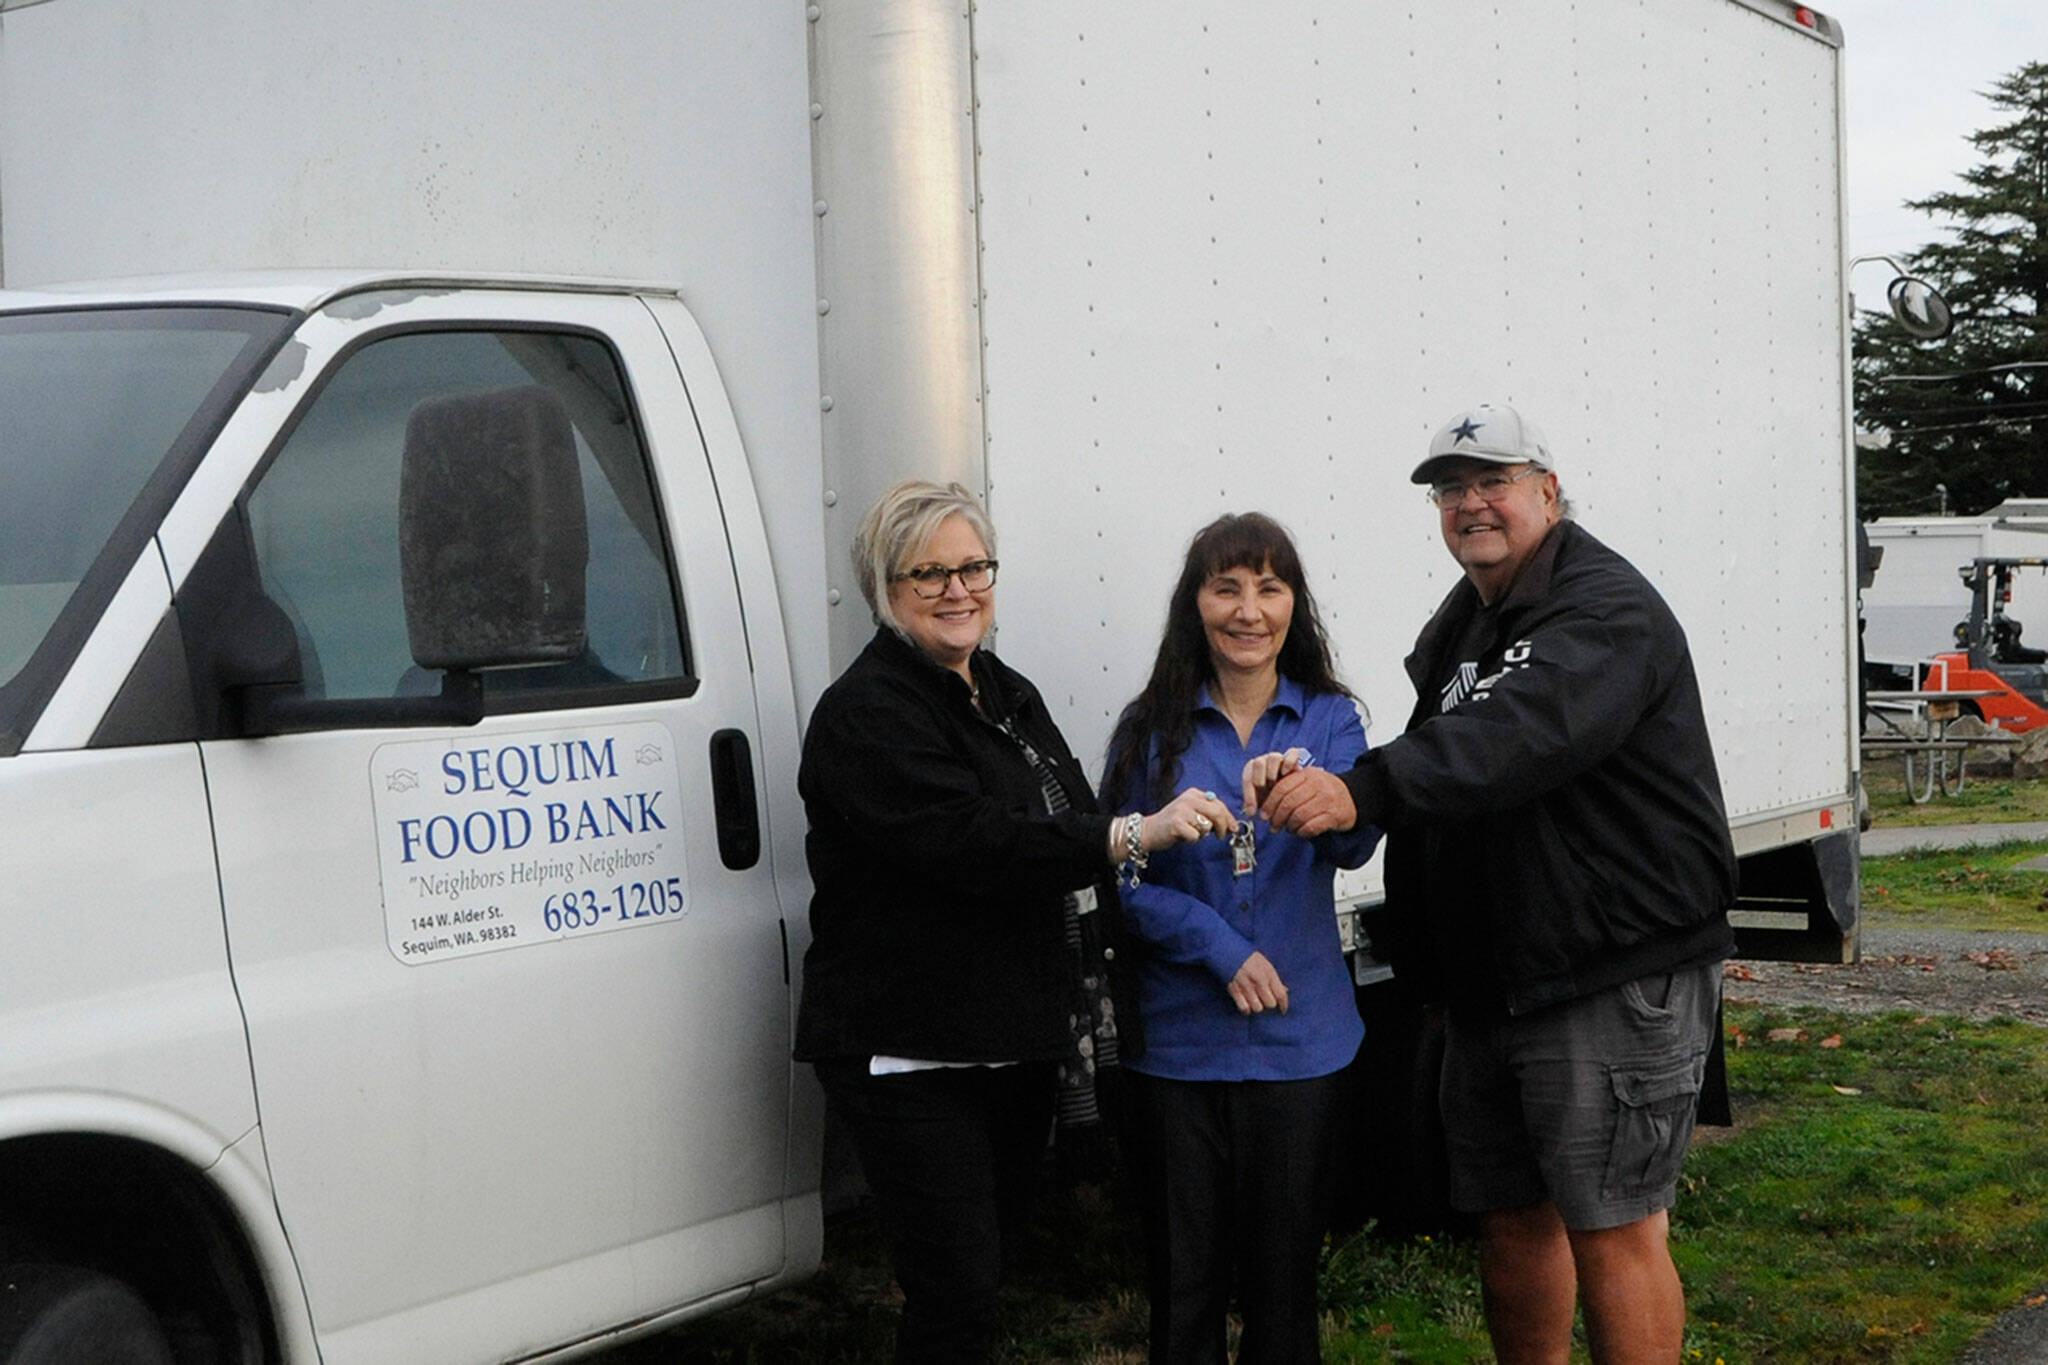 Sequim Food Bank leaders, executive director Andra Smith, on left, and volunteer Stephen Rosales, right, hand the keys of the facility’s longtime delivery truck to Mary Budke, executive director of the Boys & Girls Clubs of the Olympic Peninsula on Nov. 8. Budke said they’ll use it to pickup large donations and transfer items between the Sequim and Port Angeles units. Sequim Gazette photo by Matthew Nash